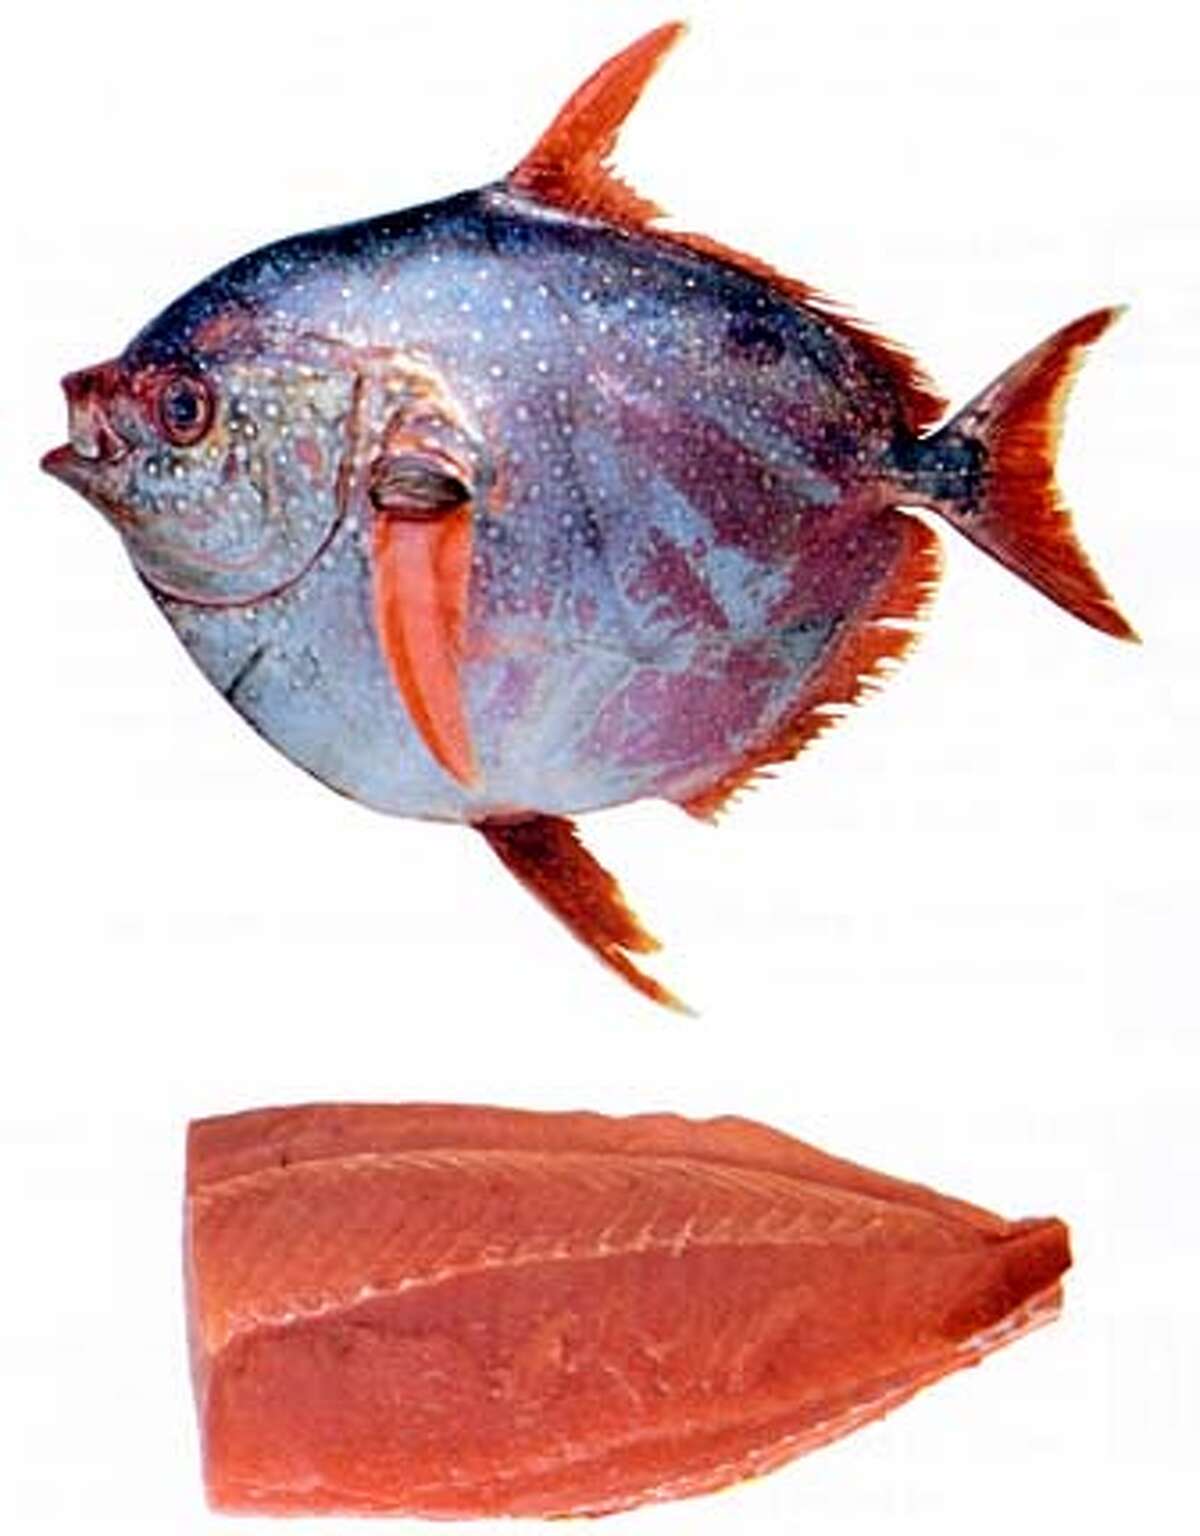 Opah, also called, moonfish, sunfish, kingfish, redfin ocean pan, and Jerusalem haddock. Their unusual looks, large size and scarcity, make them prized trophies for anglers.